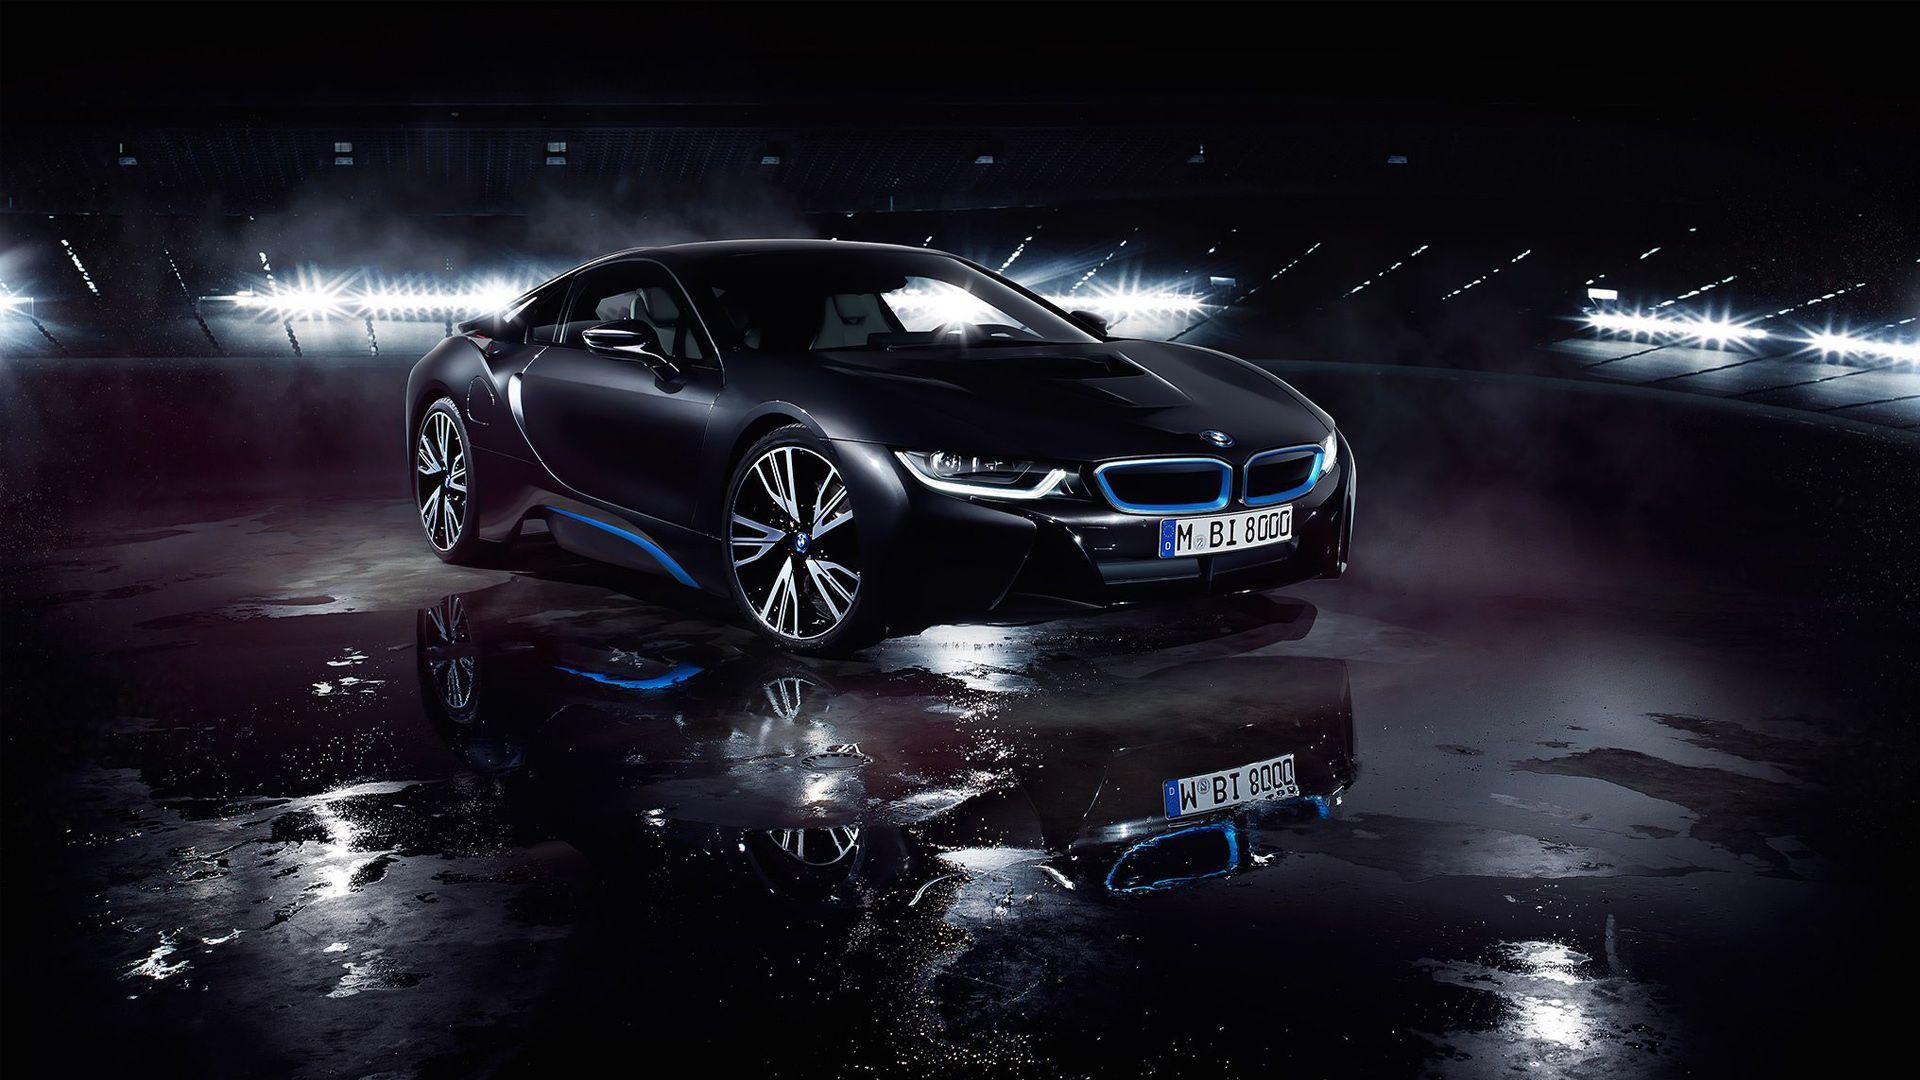 Download Bmw wallpapers for mobile phone free Bmw HD pictures